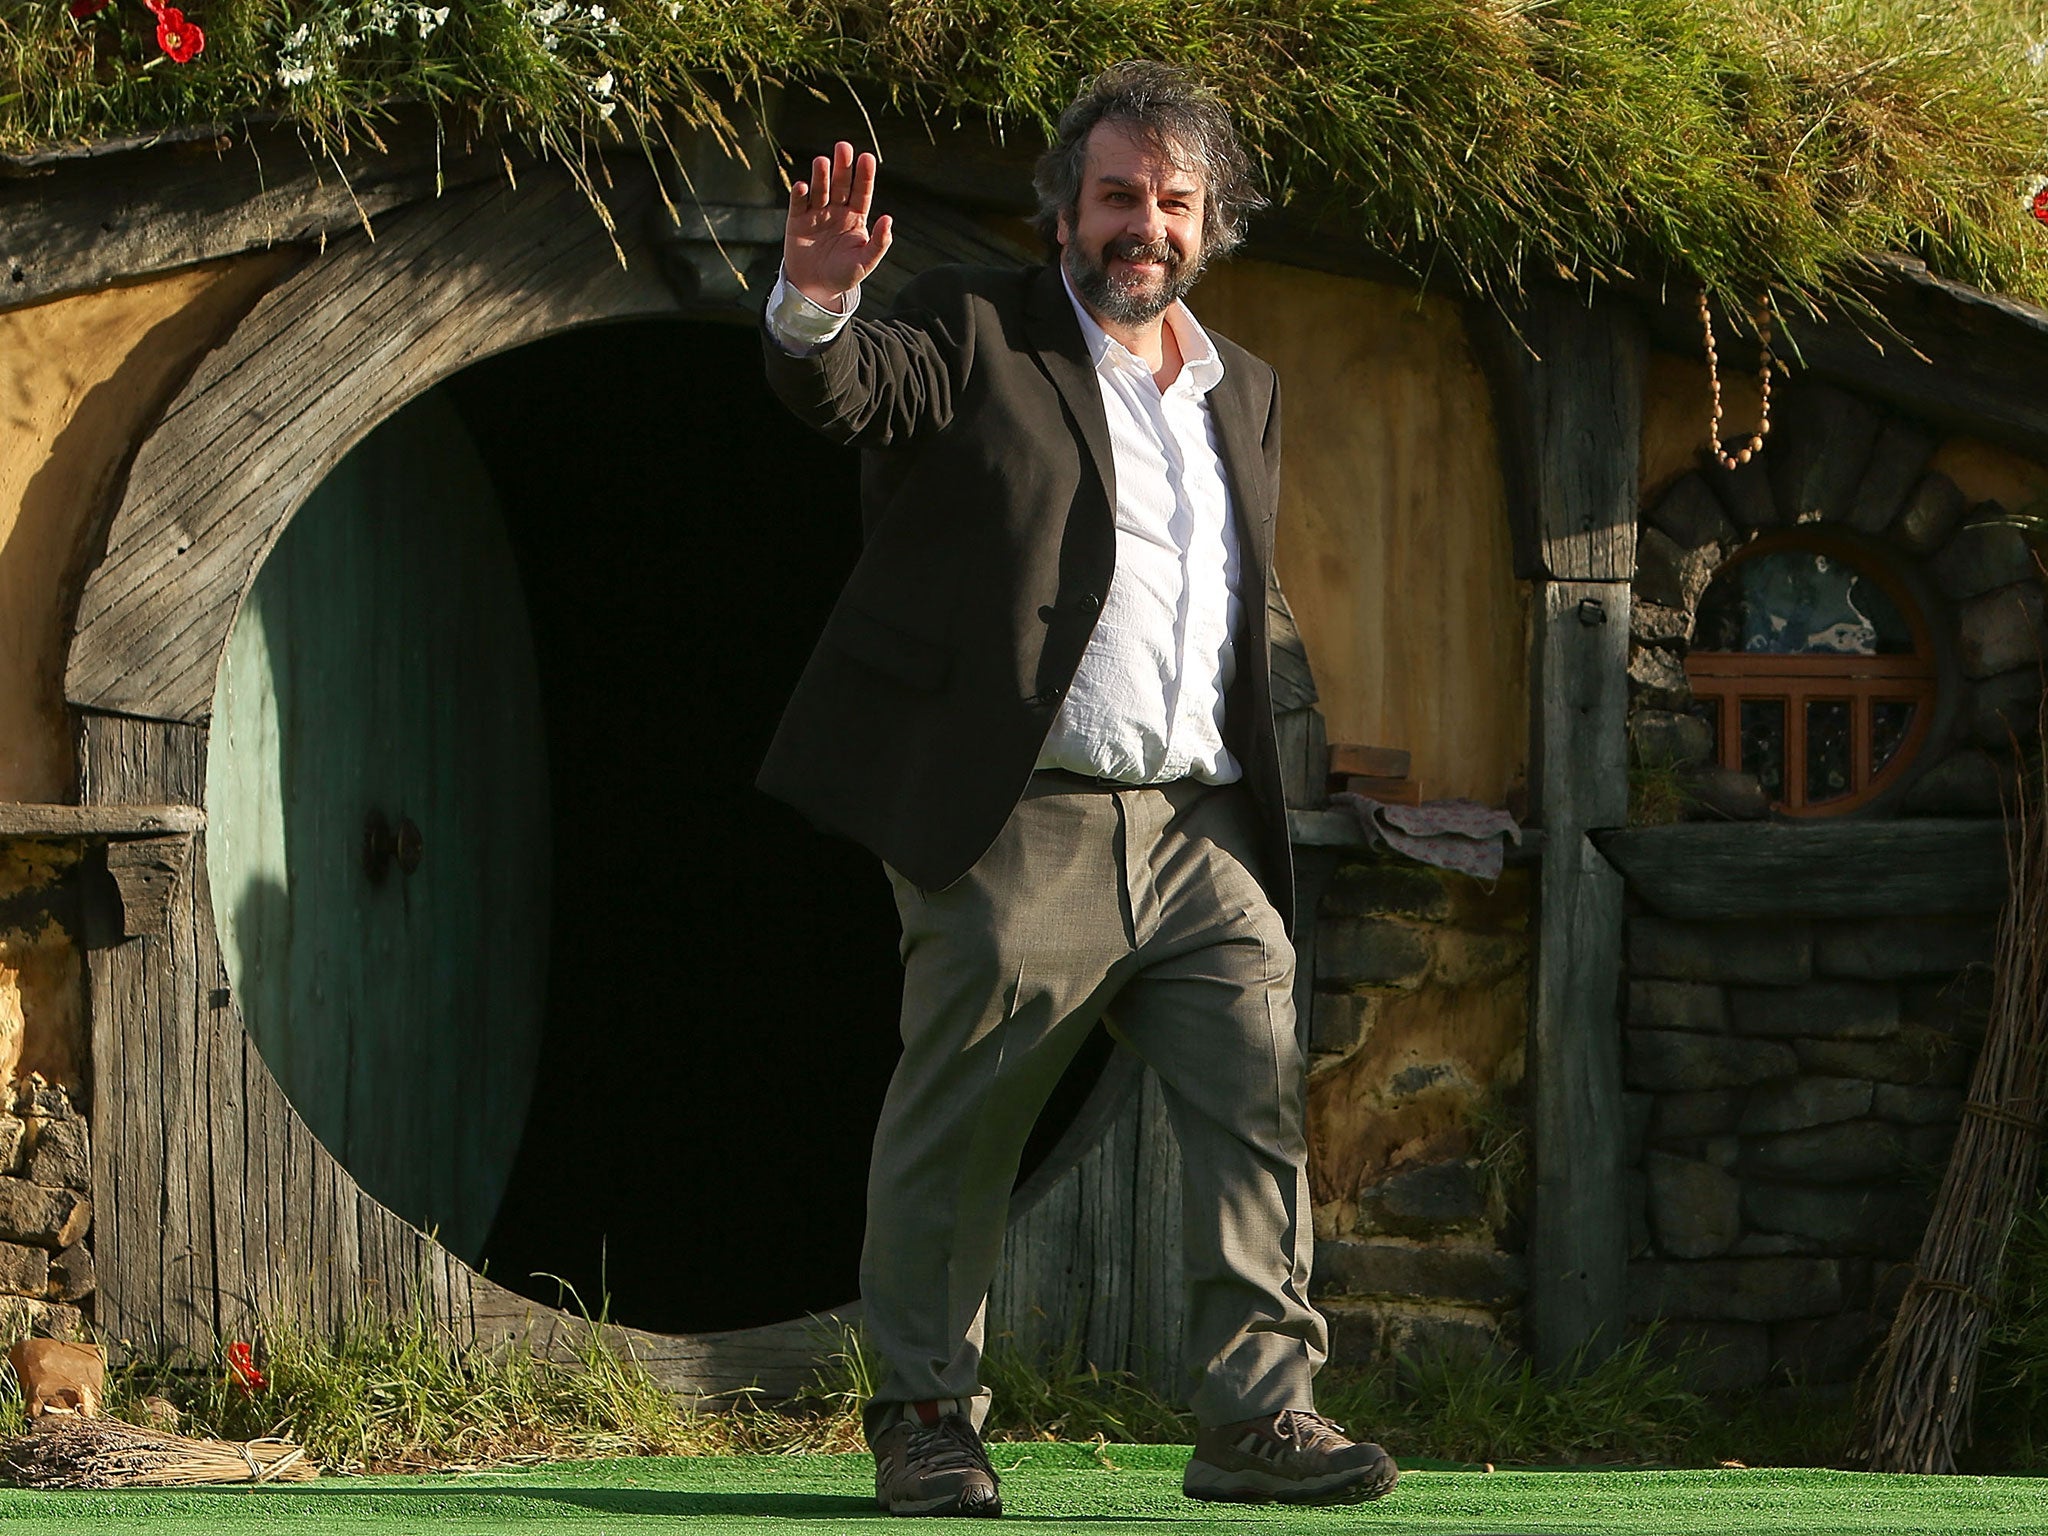 Peter Jackson has created a 'Hobbit house' in his garden, a bit like this one at the world premiere